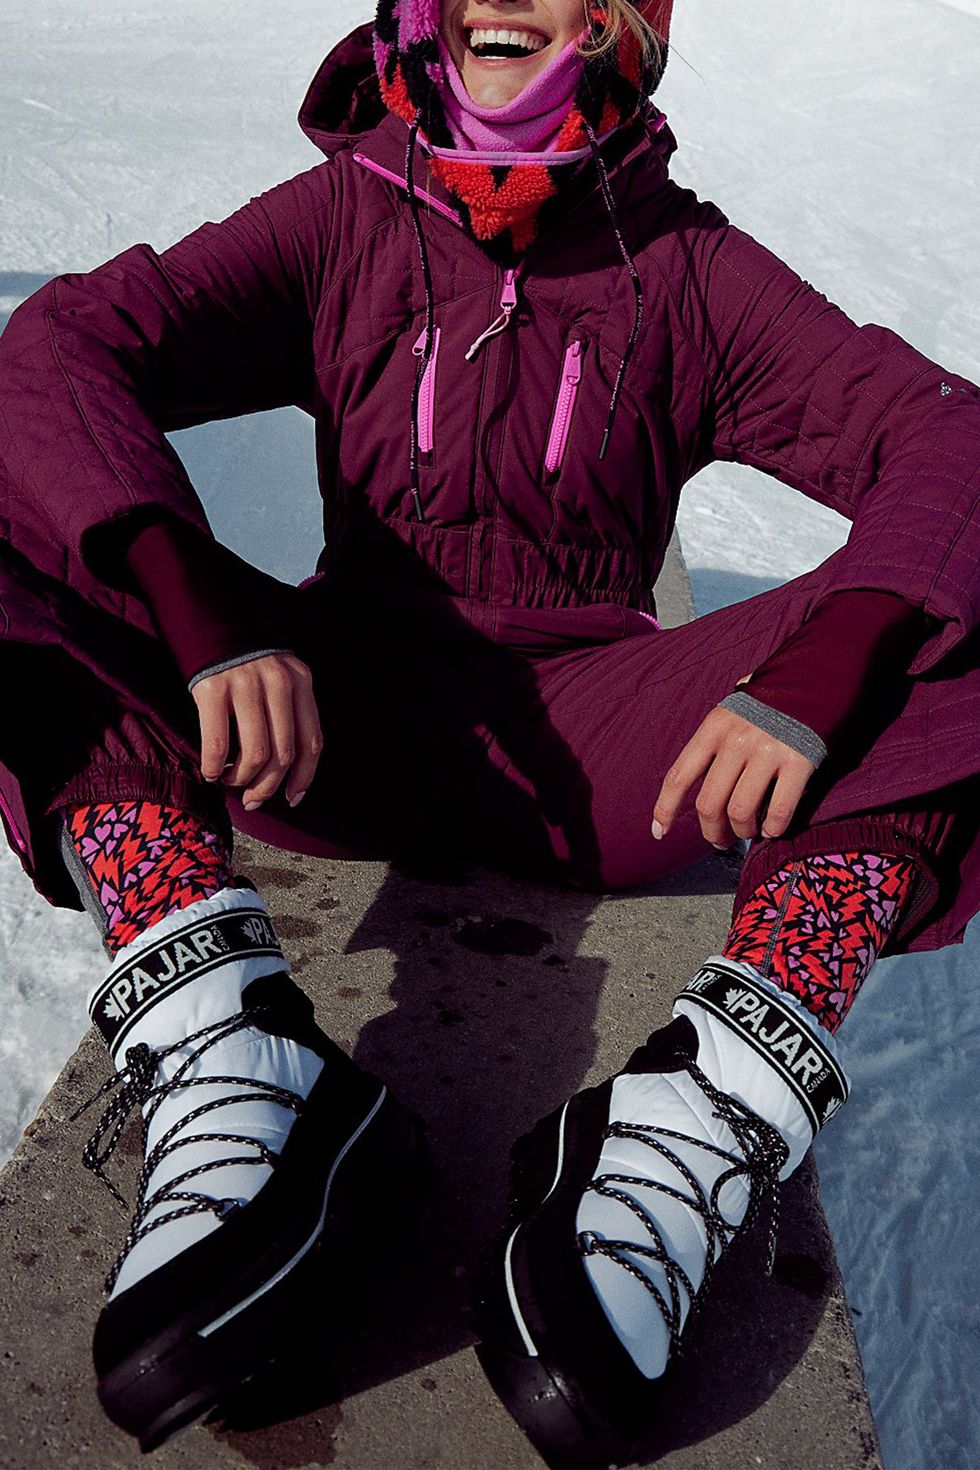 23 Best Ski Suits for Women in 2023